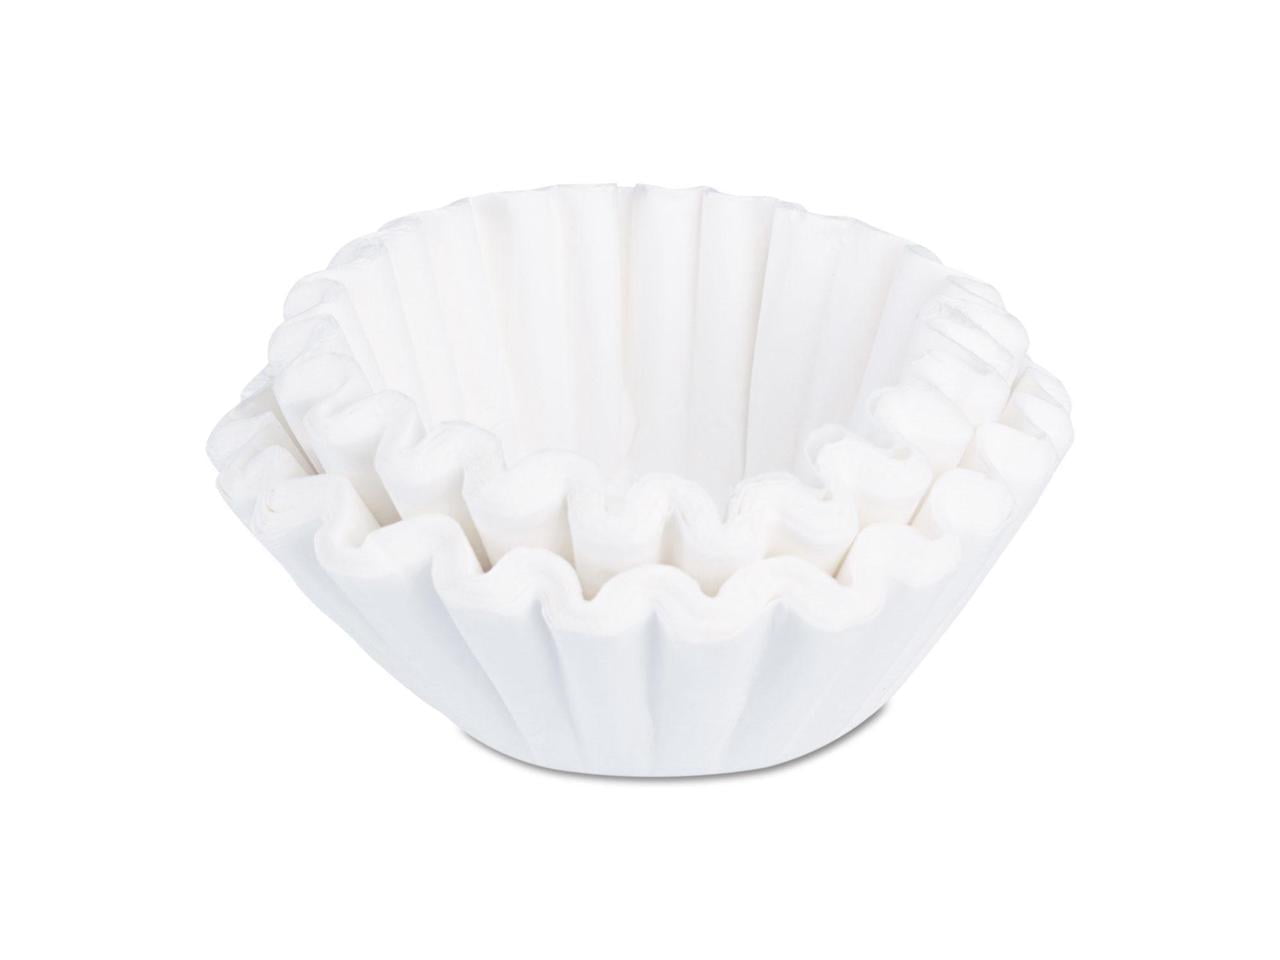 Extra Large Coffee Filters - 1.5 - 3 Gallon (13 x 5) Coffee